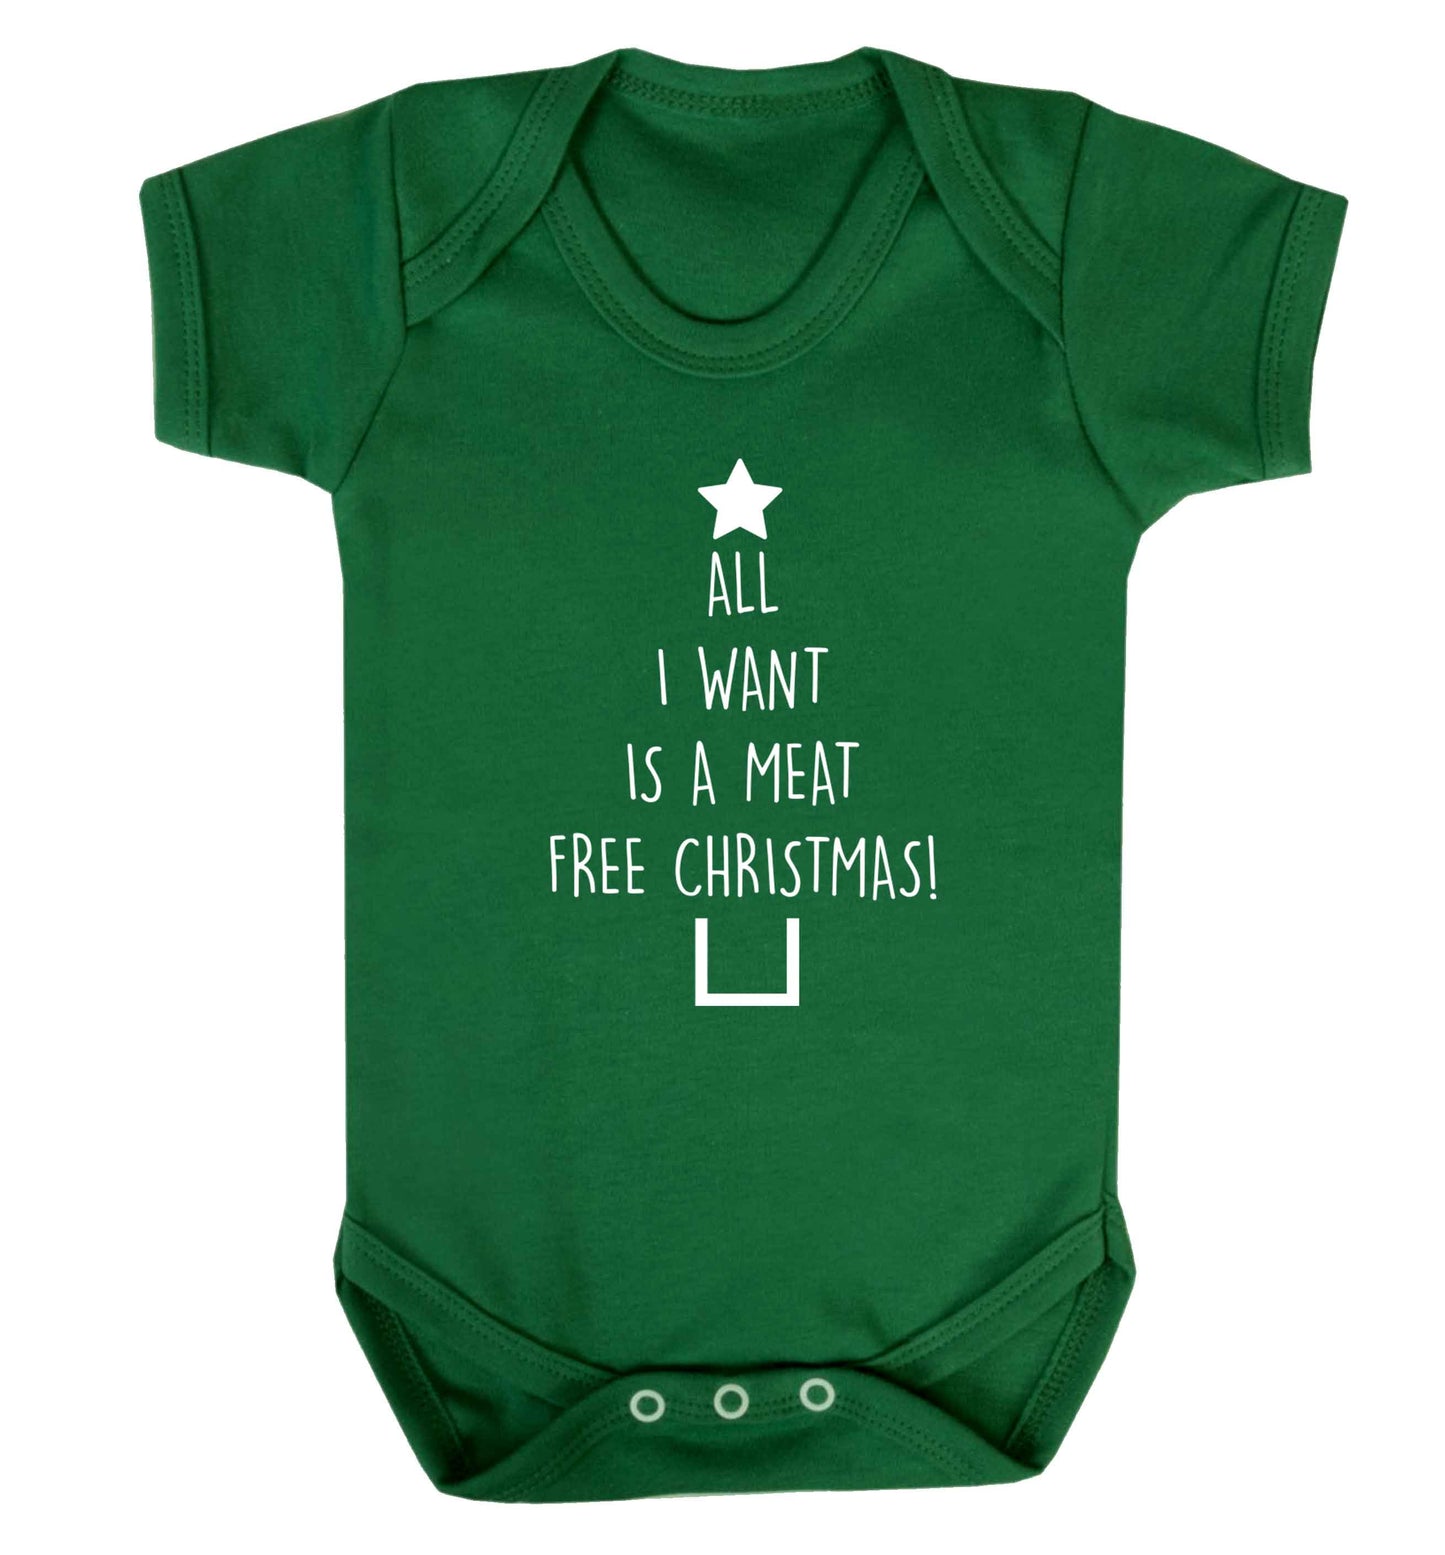 All I want is a meat free Christmas Baby Vest green 18-24 months